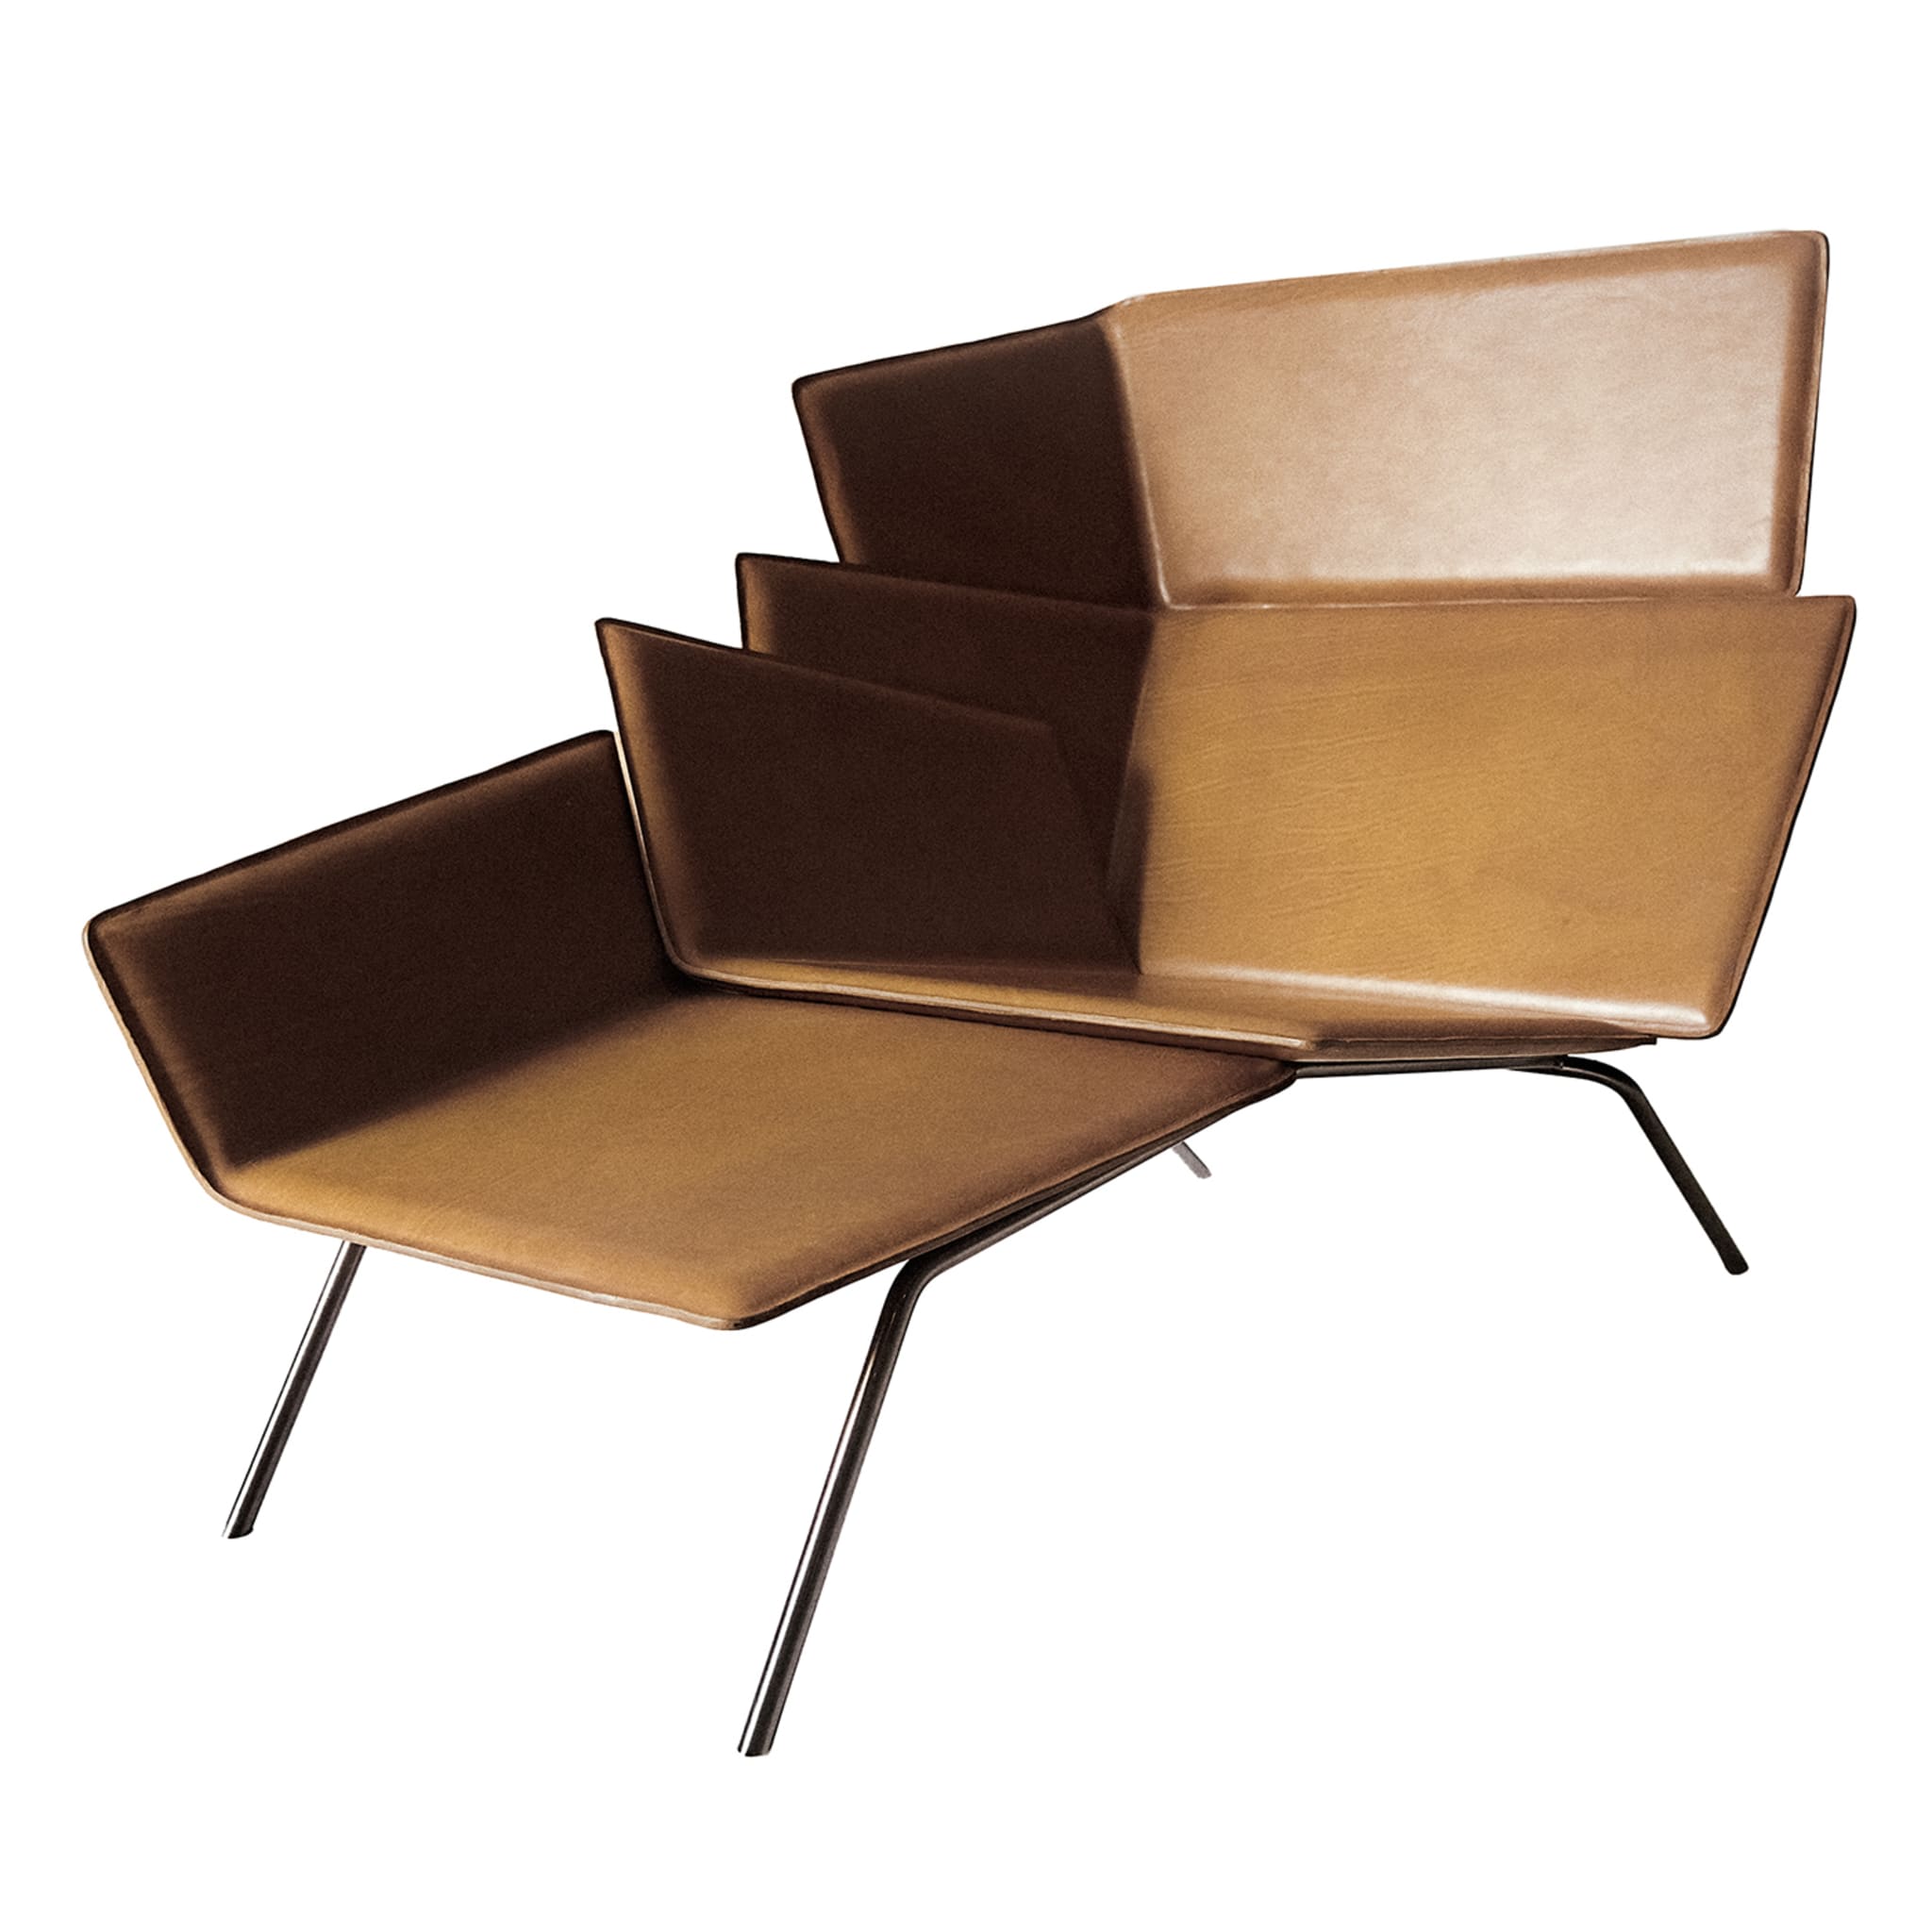 Blade Brown Chaise Longue by Ludovica + Roberto Palomba - Main view